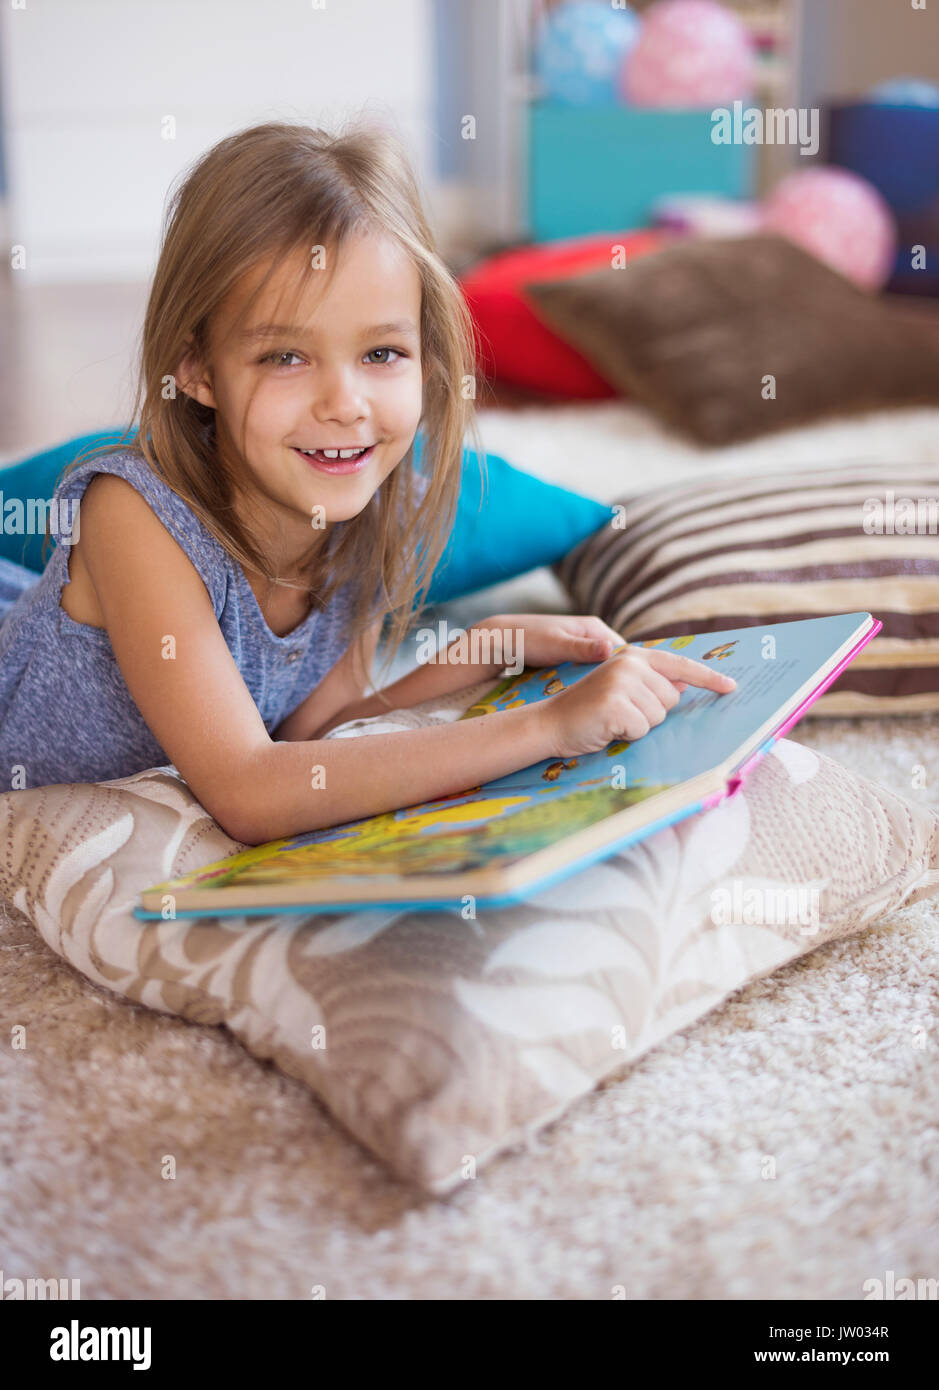 The most favourite book of little girl Stock Photo